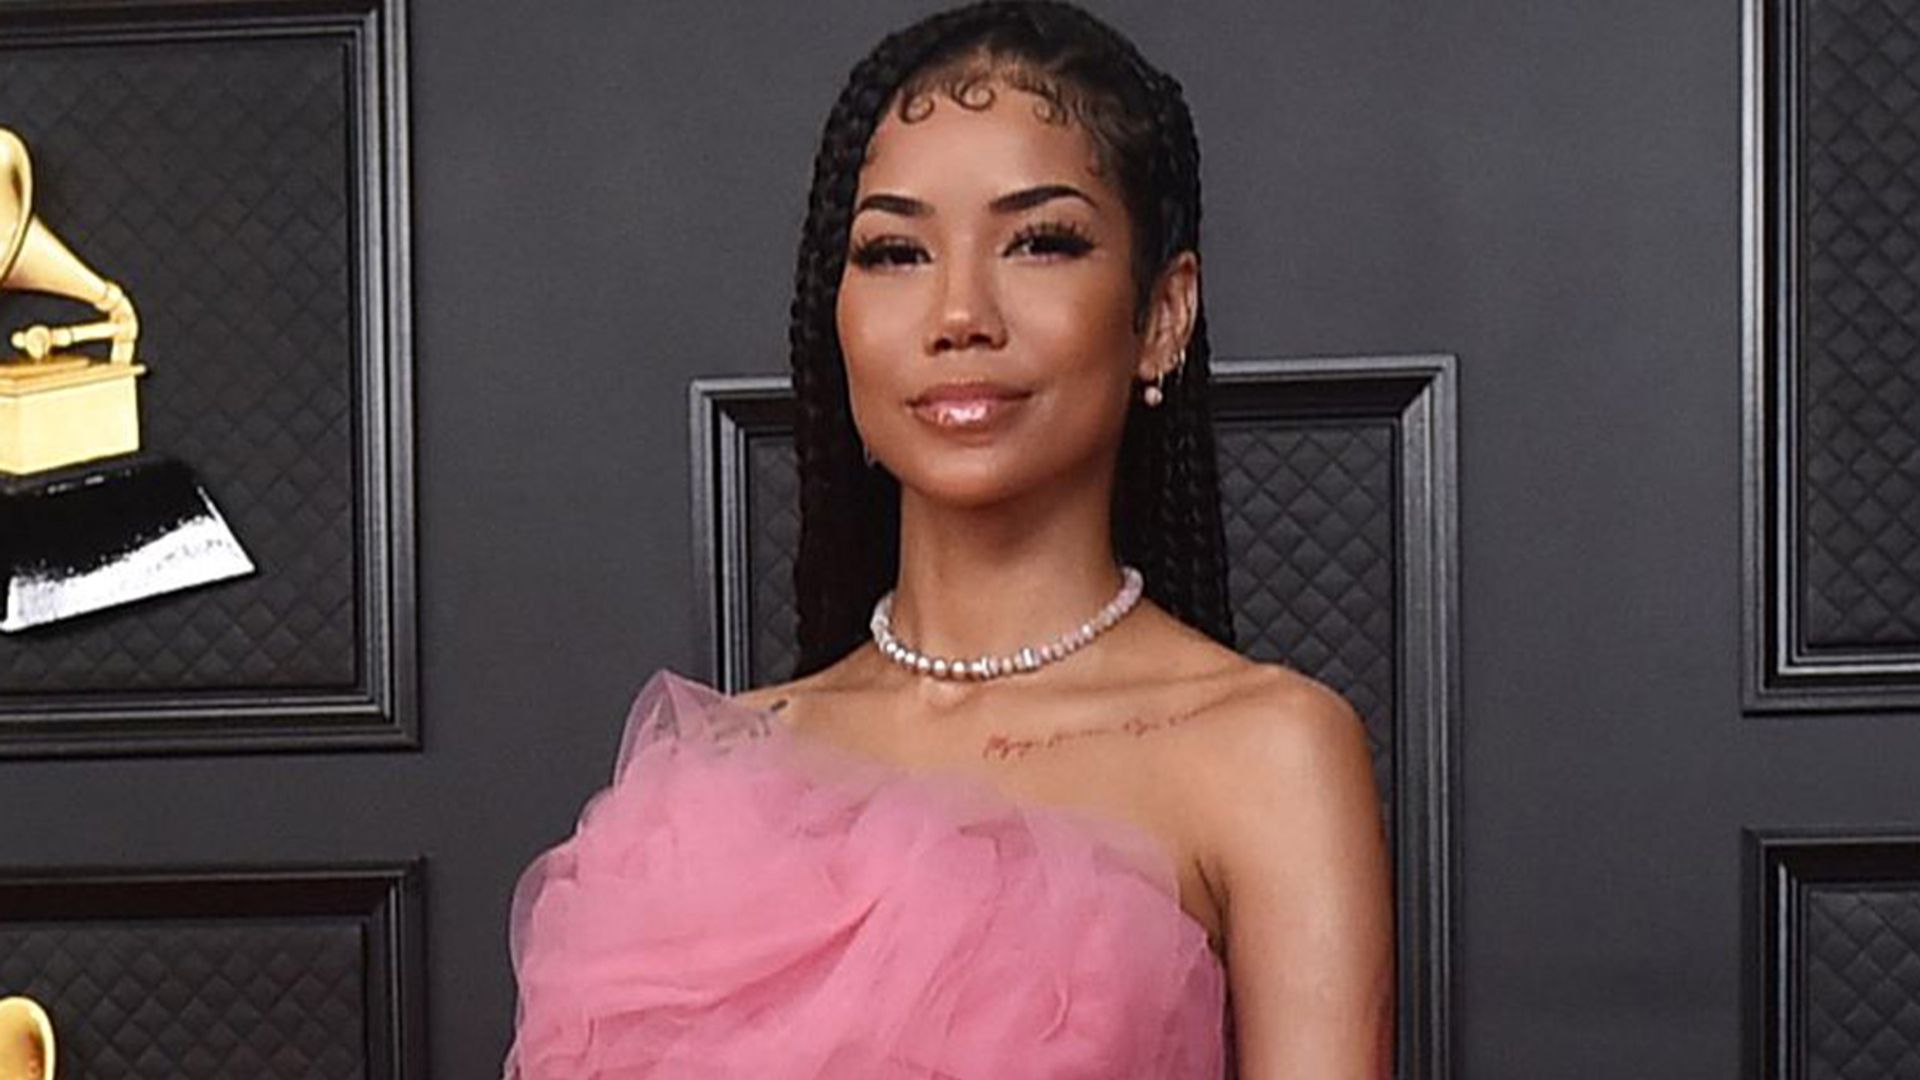 Jhene Aiko's dramatic Grammys dress is almost identical to Rihanna's past look